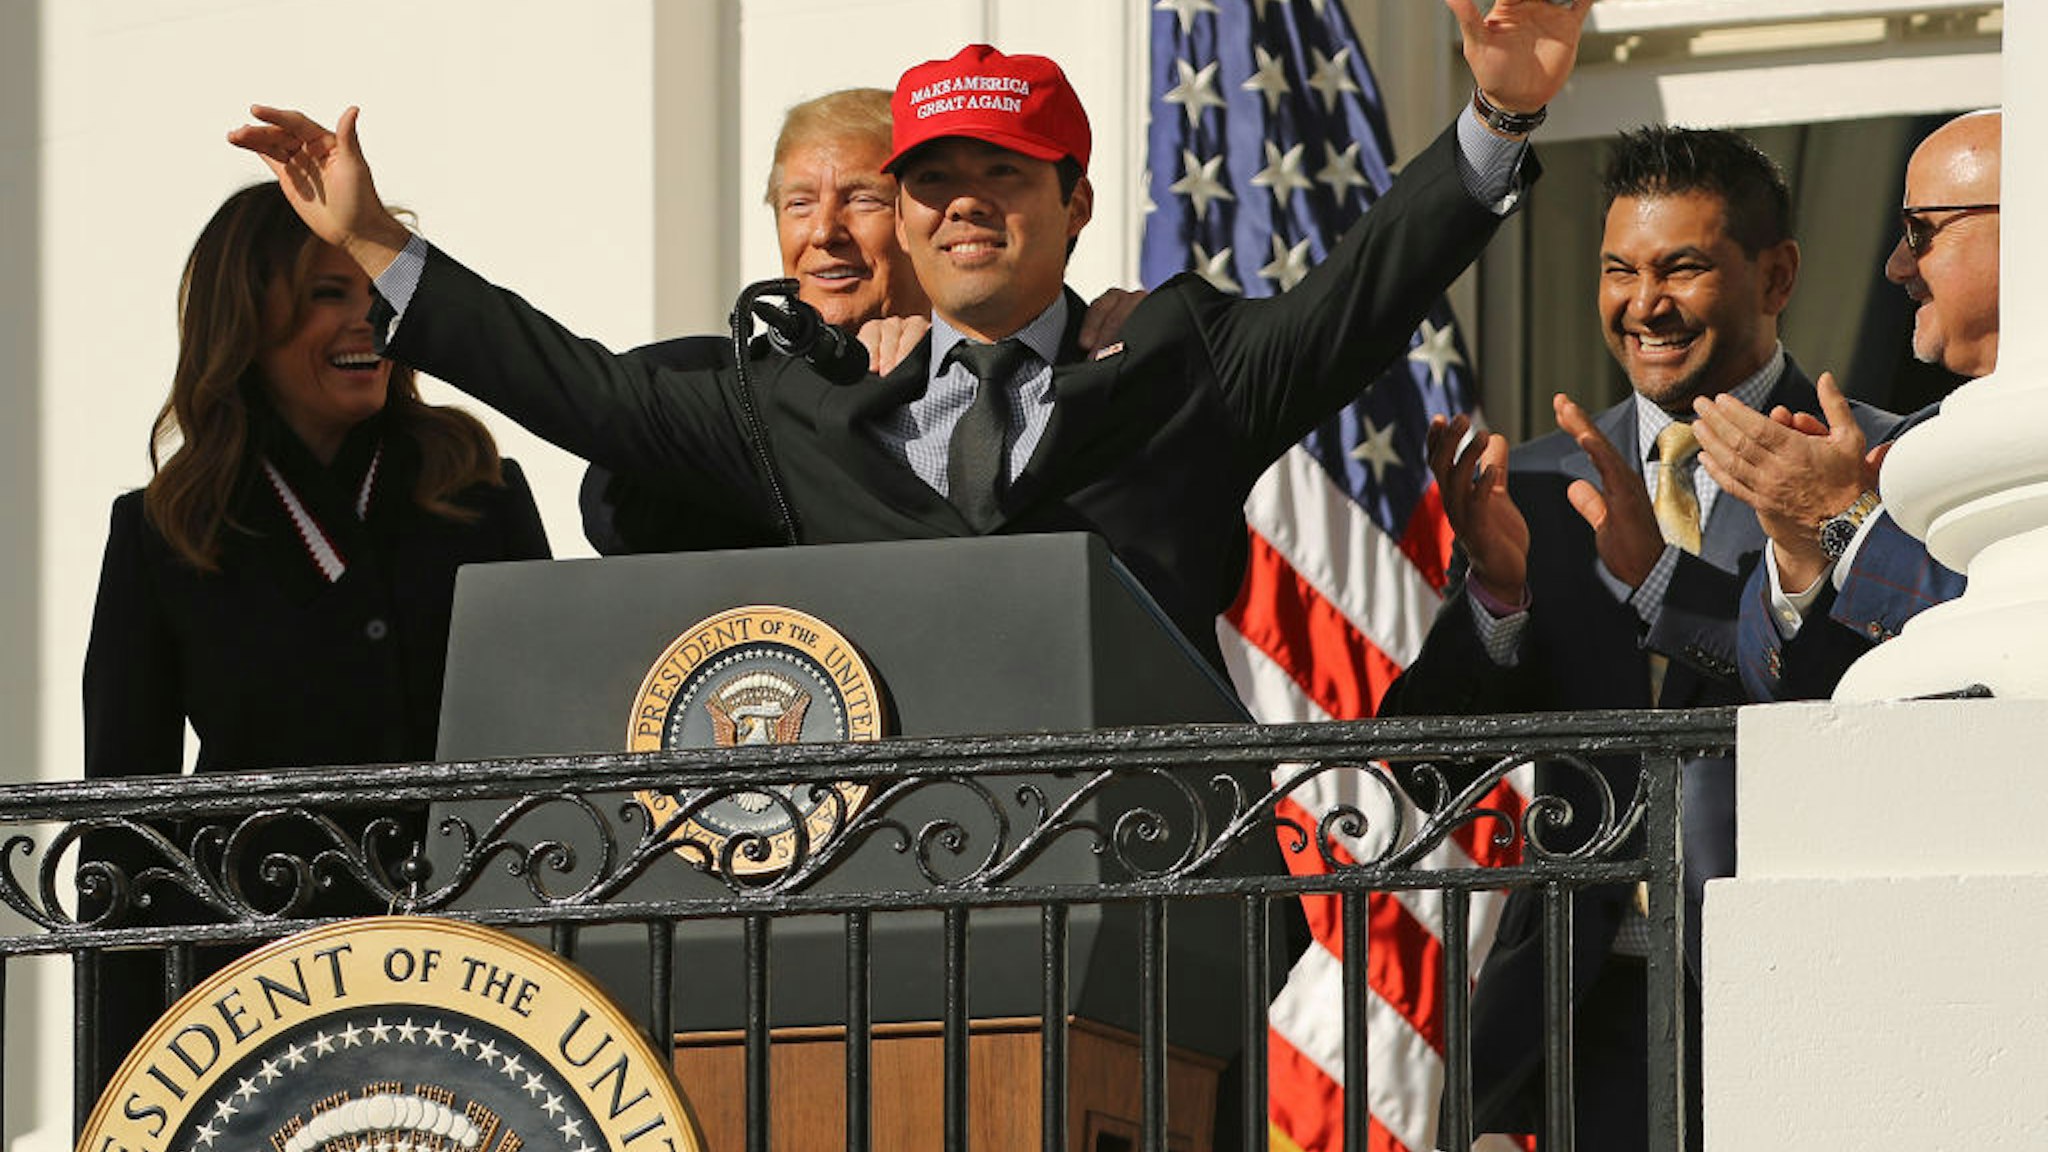 U.S. President Donald Trump reacts to Washington National catcher Kurt Suzuki wearing a 'Make America Great Again' cap during a celebration of the 2019 World Series Champions at the White House November 04, 2019 in Washington, DC. The Nationals are Washington’s first Major League Baseball team to win the World Series since 1924.